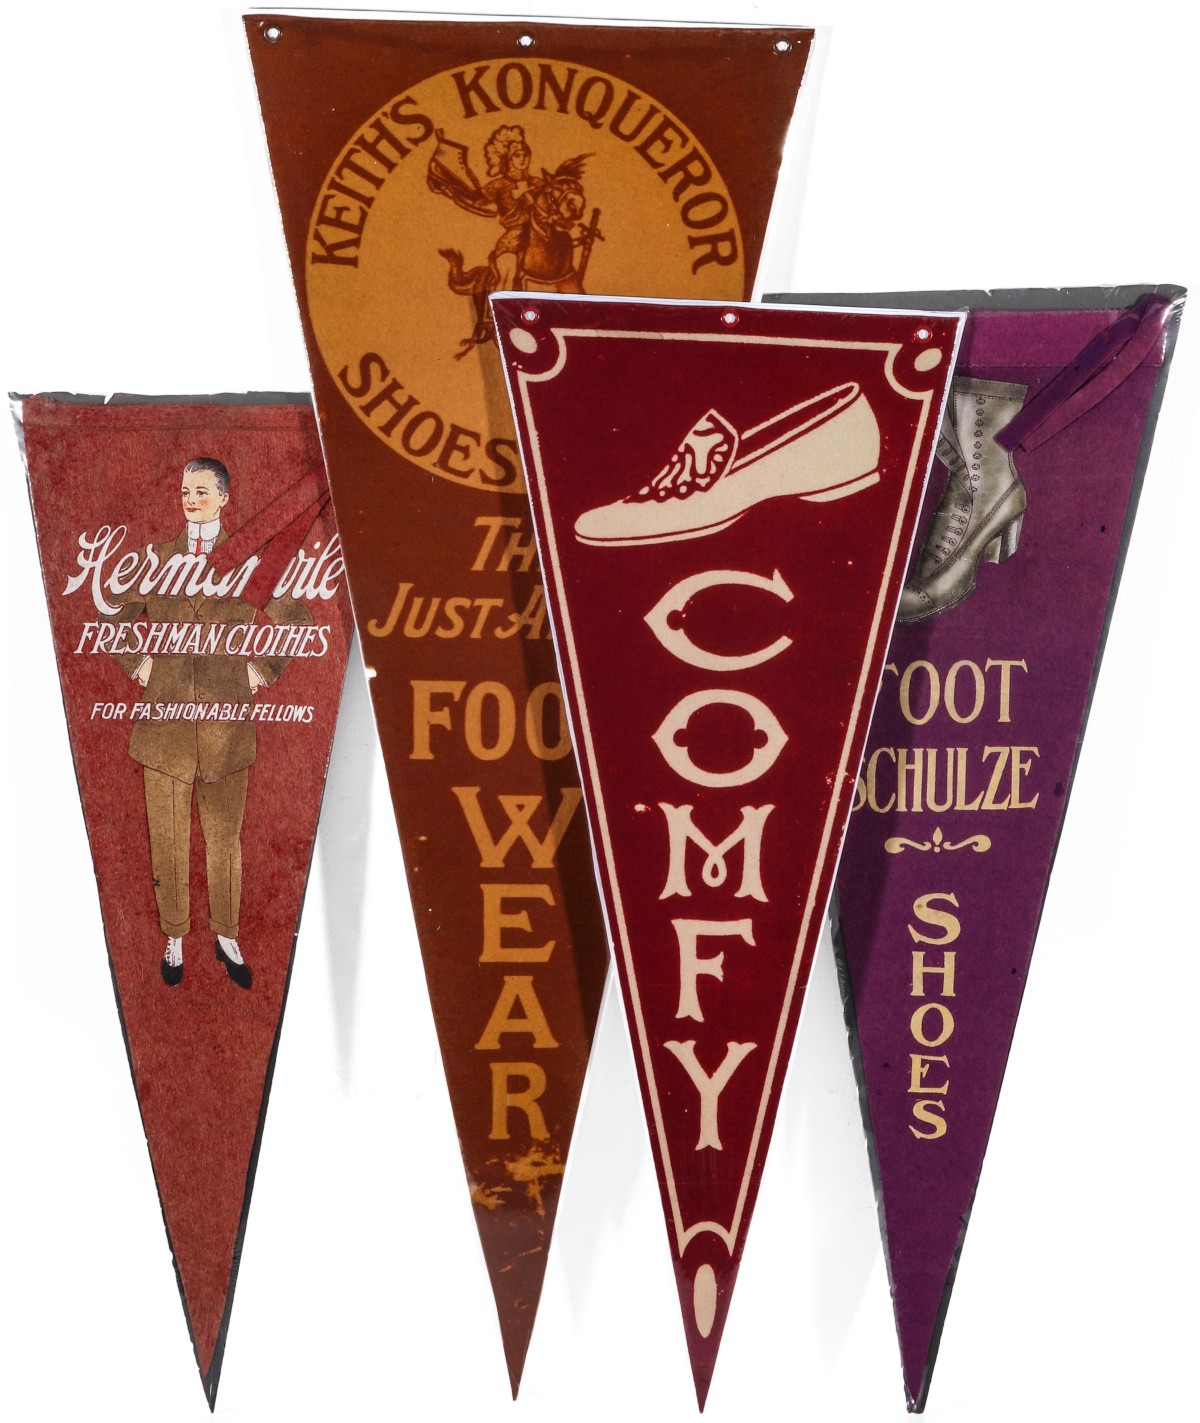 A COLLECTION OF SHOE AND CLOTHING ADVERTISING PENNANTS